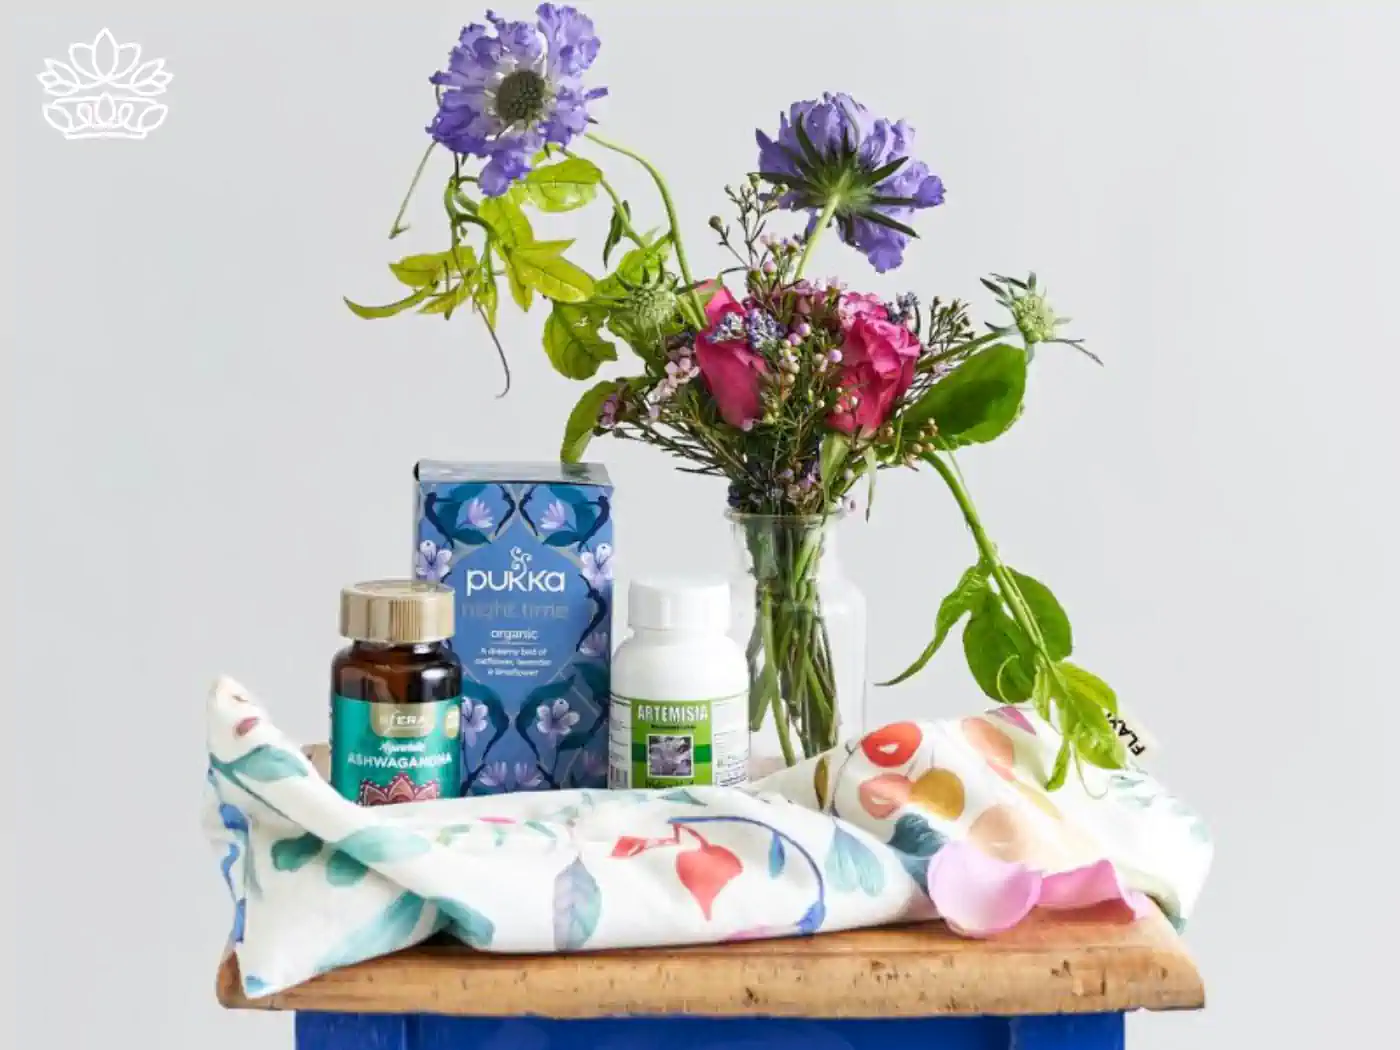 A collection of natural wellness products including Pukka Night Time tea, ashwagandha supplement, and Artemisia absinthium tincture, arranged on a wooden tray with vibrant fresh flowers. Healthy Gift Boxes Delivered with Heart. Fabulous Flowers and Gifts.